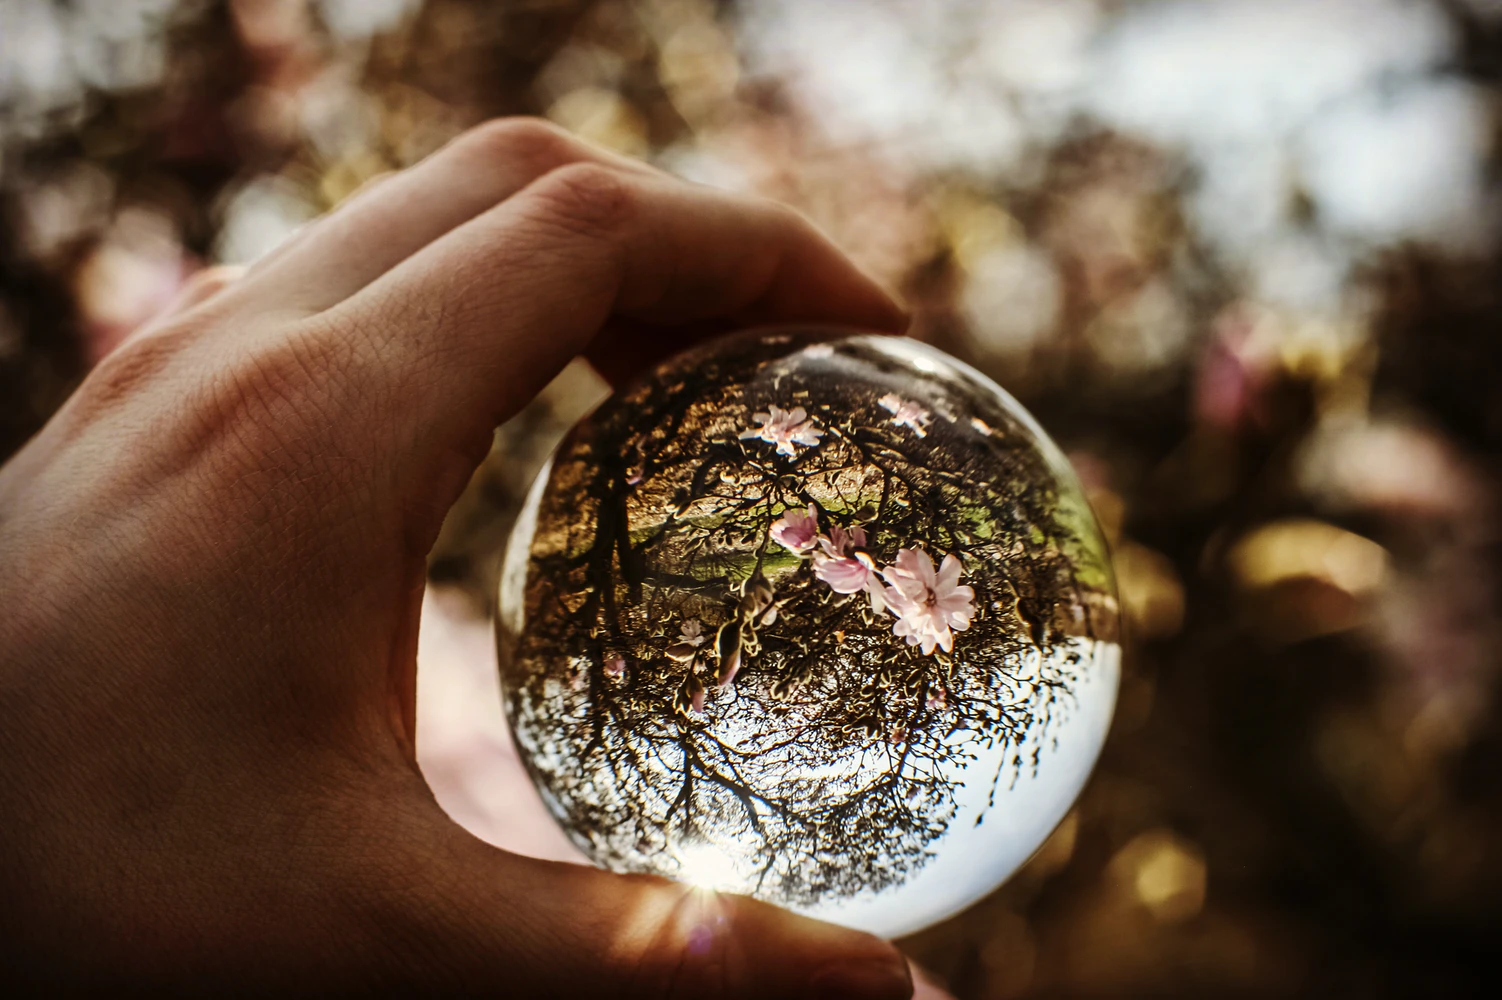 A Crystal Ball as a Metaphor for Seeing the Future